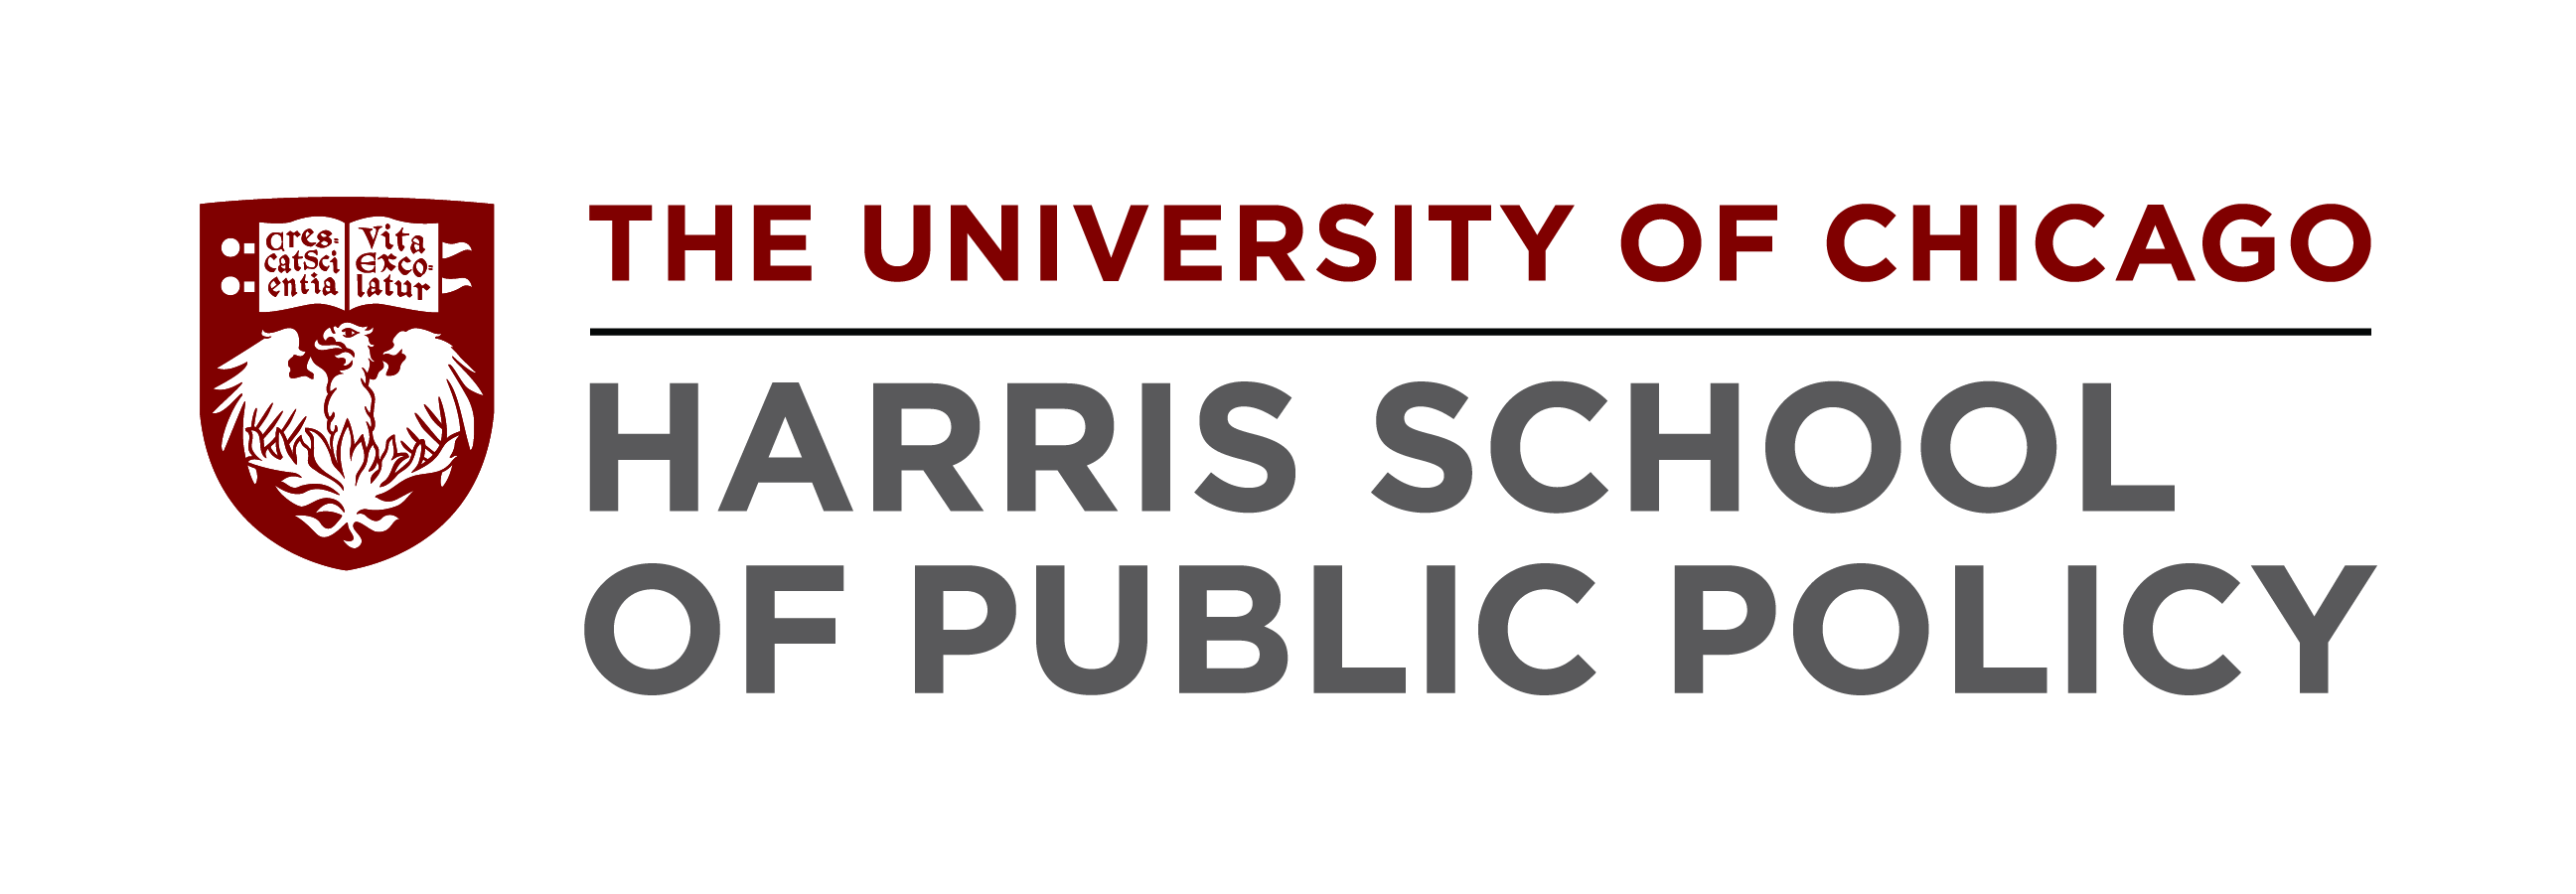 phd public policy university of chicago